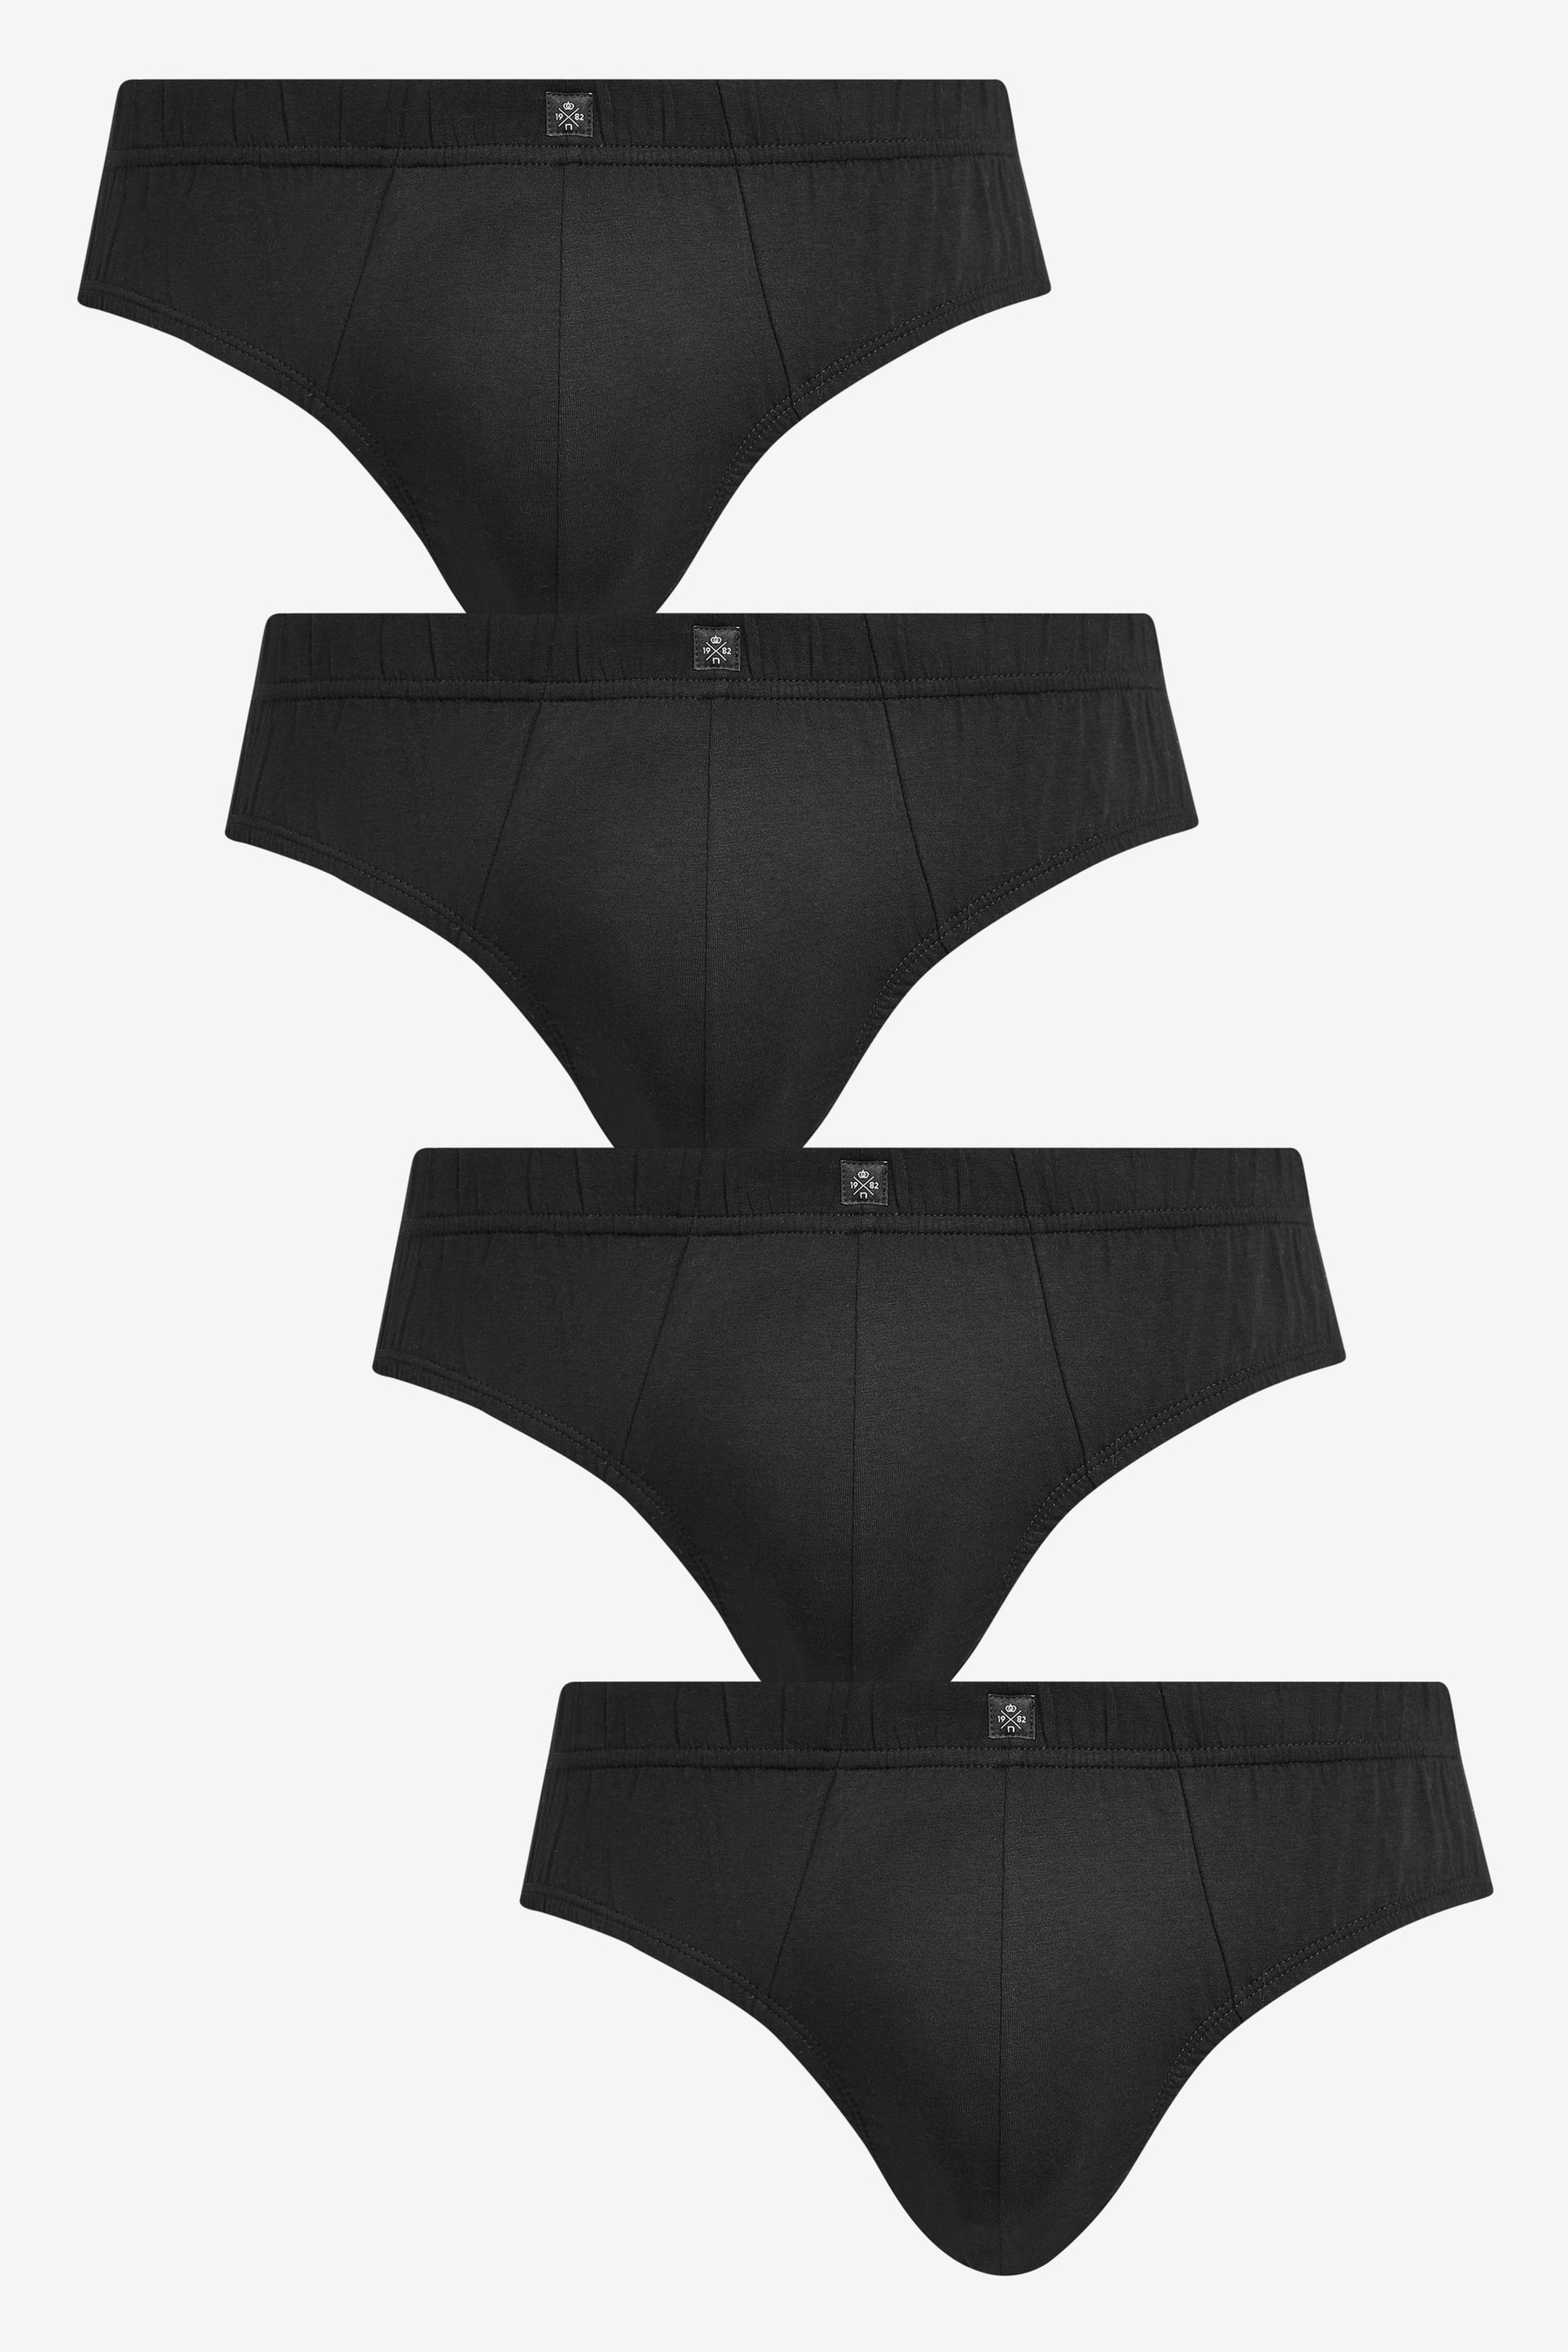 Buy Essential Black Briefs Four Pack from the Next UK online shop